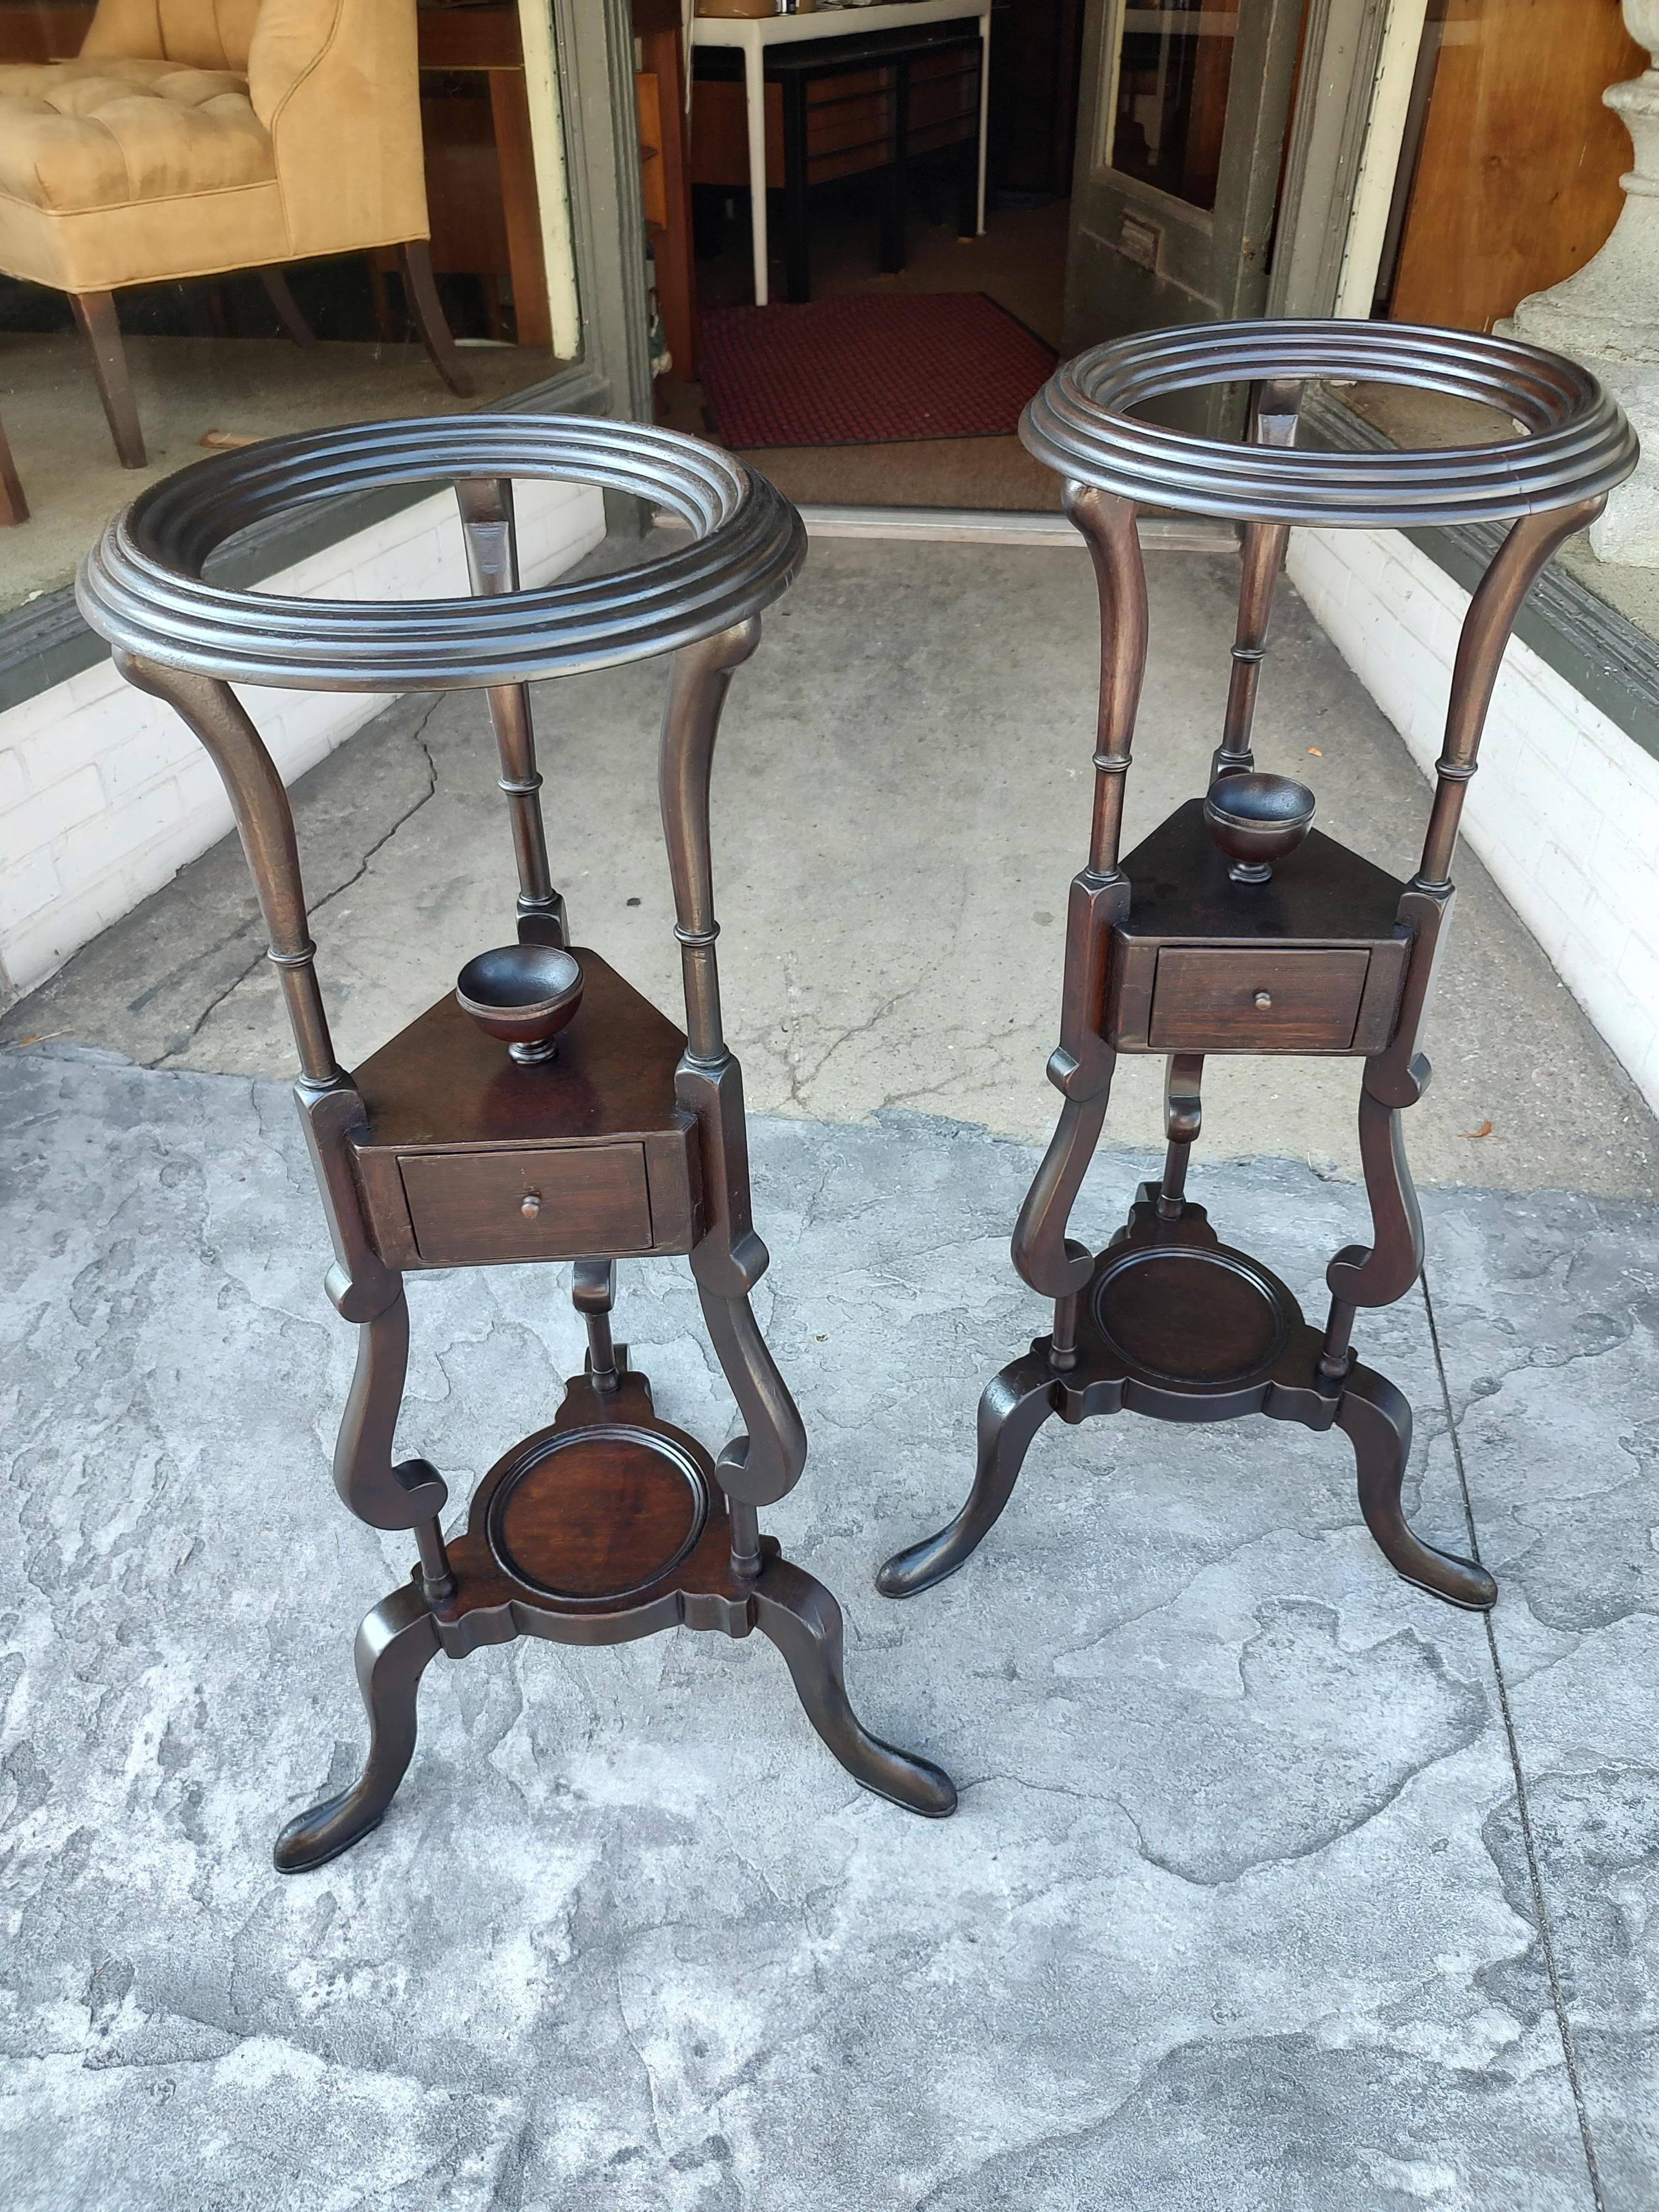 Fabulous and elegant pair of mahogany Plant stands with each having a drawer and decorative urn. Hand crafted at the turn of the century in England, possibly earlier. Refinished and looking spectacular. Opening is almost 8.25.
Copper pot pics to